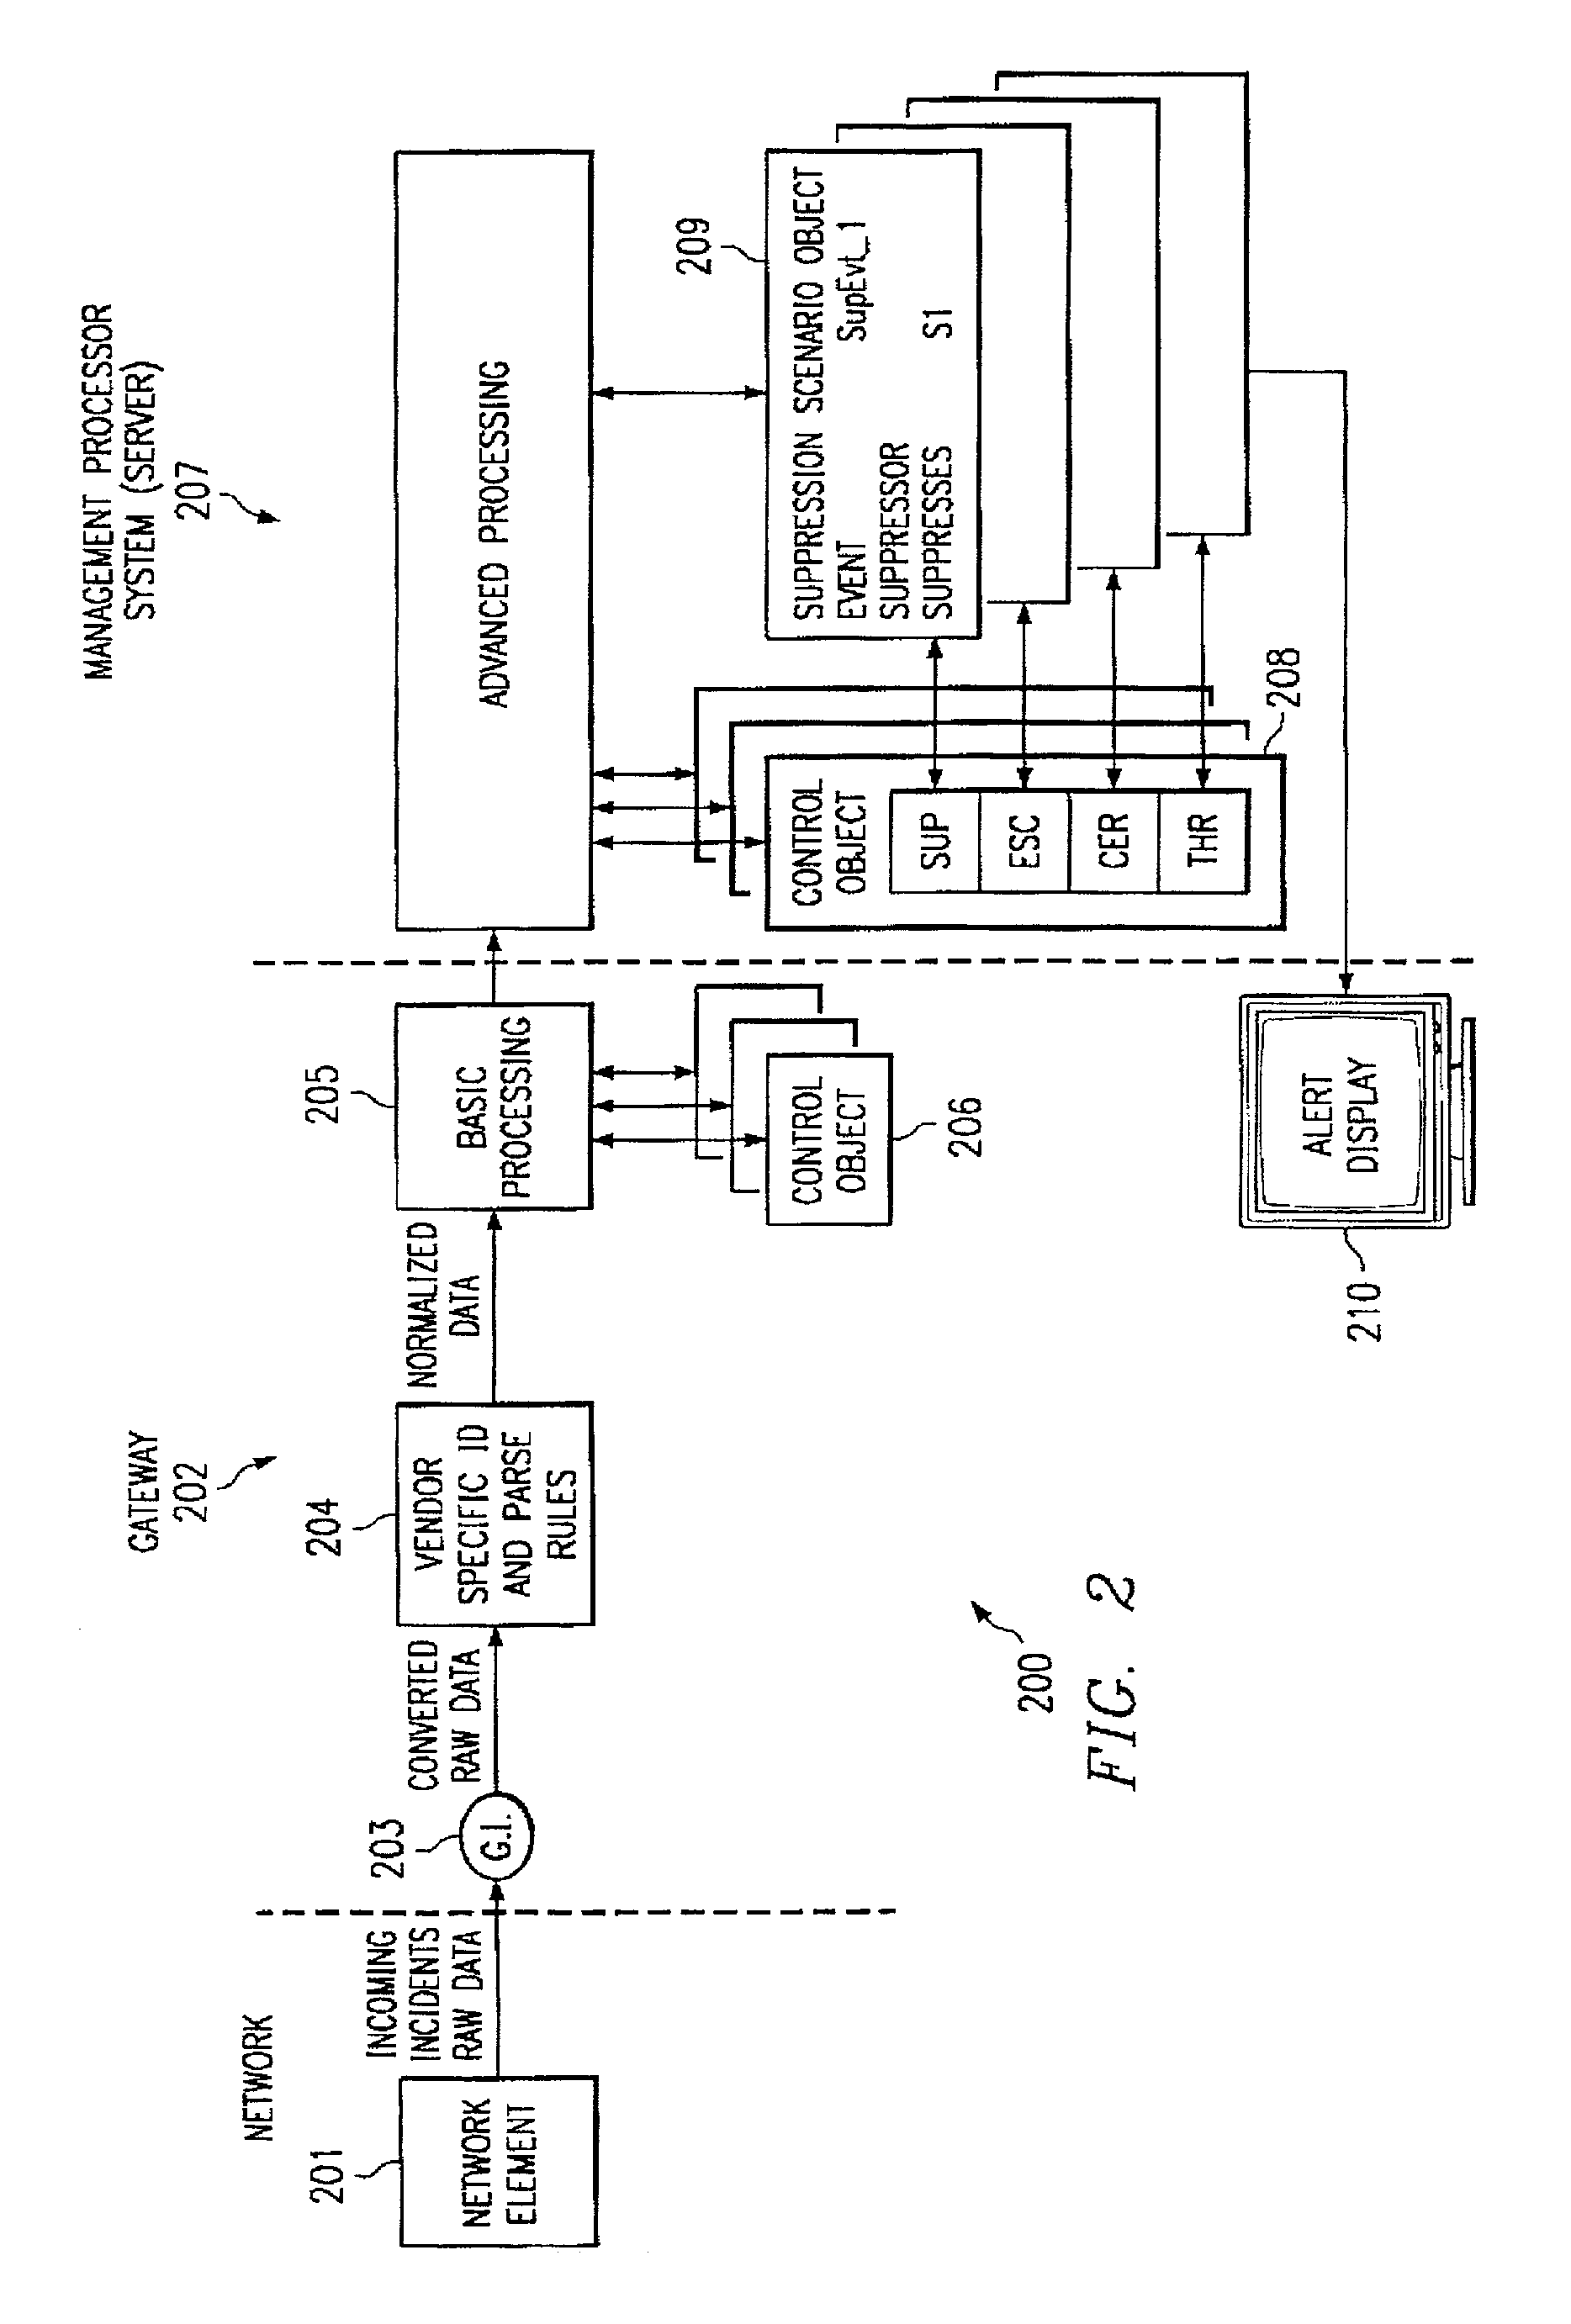 System and method for flexible processing of management policies for managing network elements